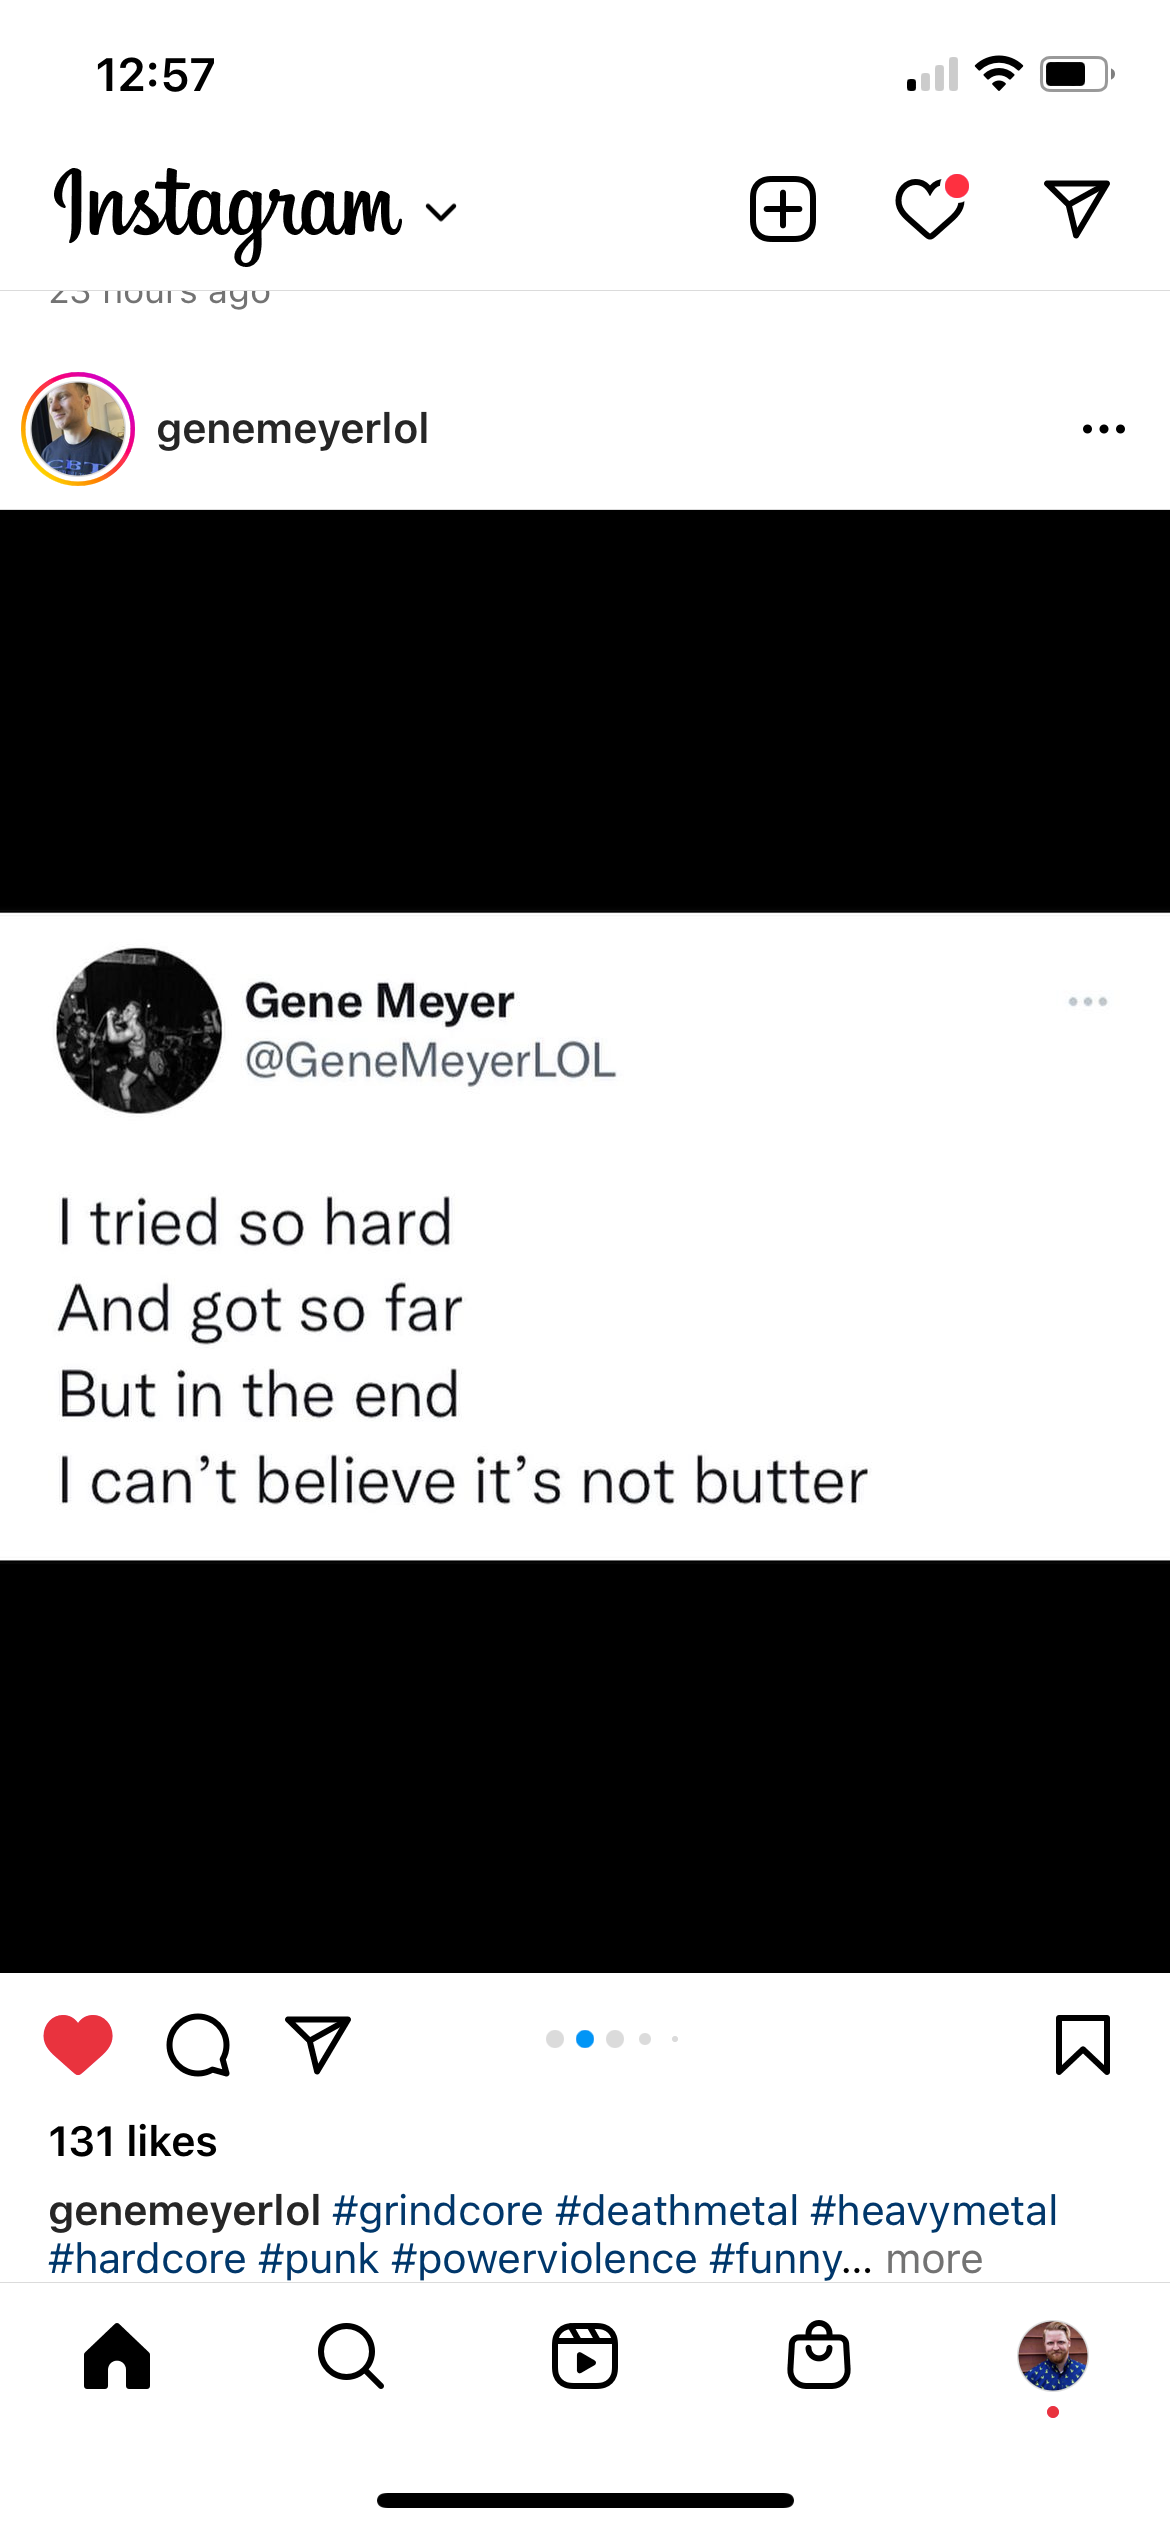 Tweets dunking on celebs - taking a break from social media message - Instagram co muro ang genemeyerlol. Gene Meyer I tried so hard And got so far But in the end I can't believe it's not butter V o 131 genemeyerlol ... more